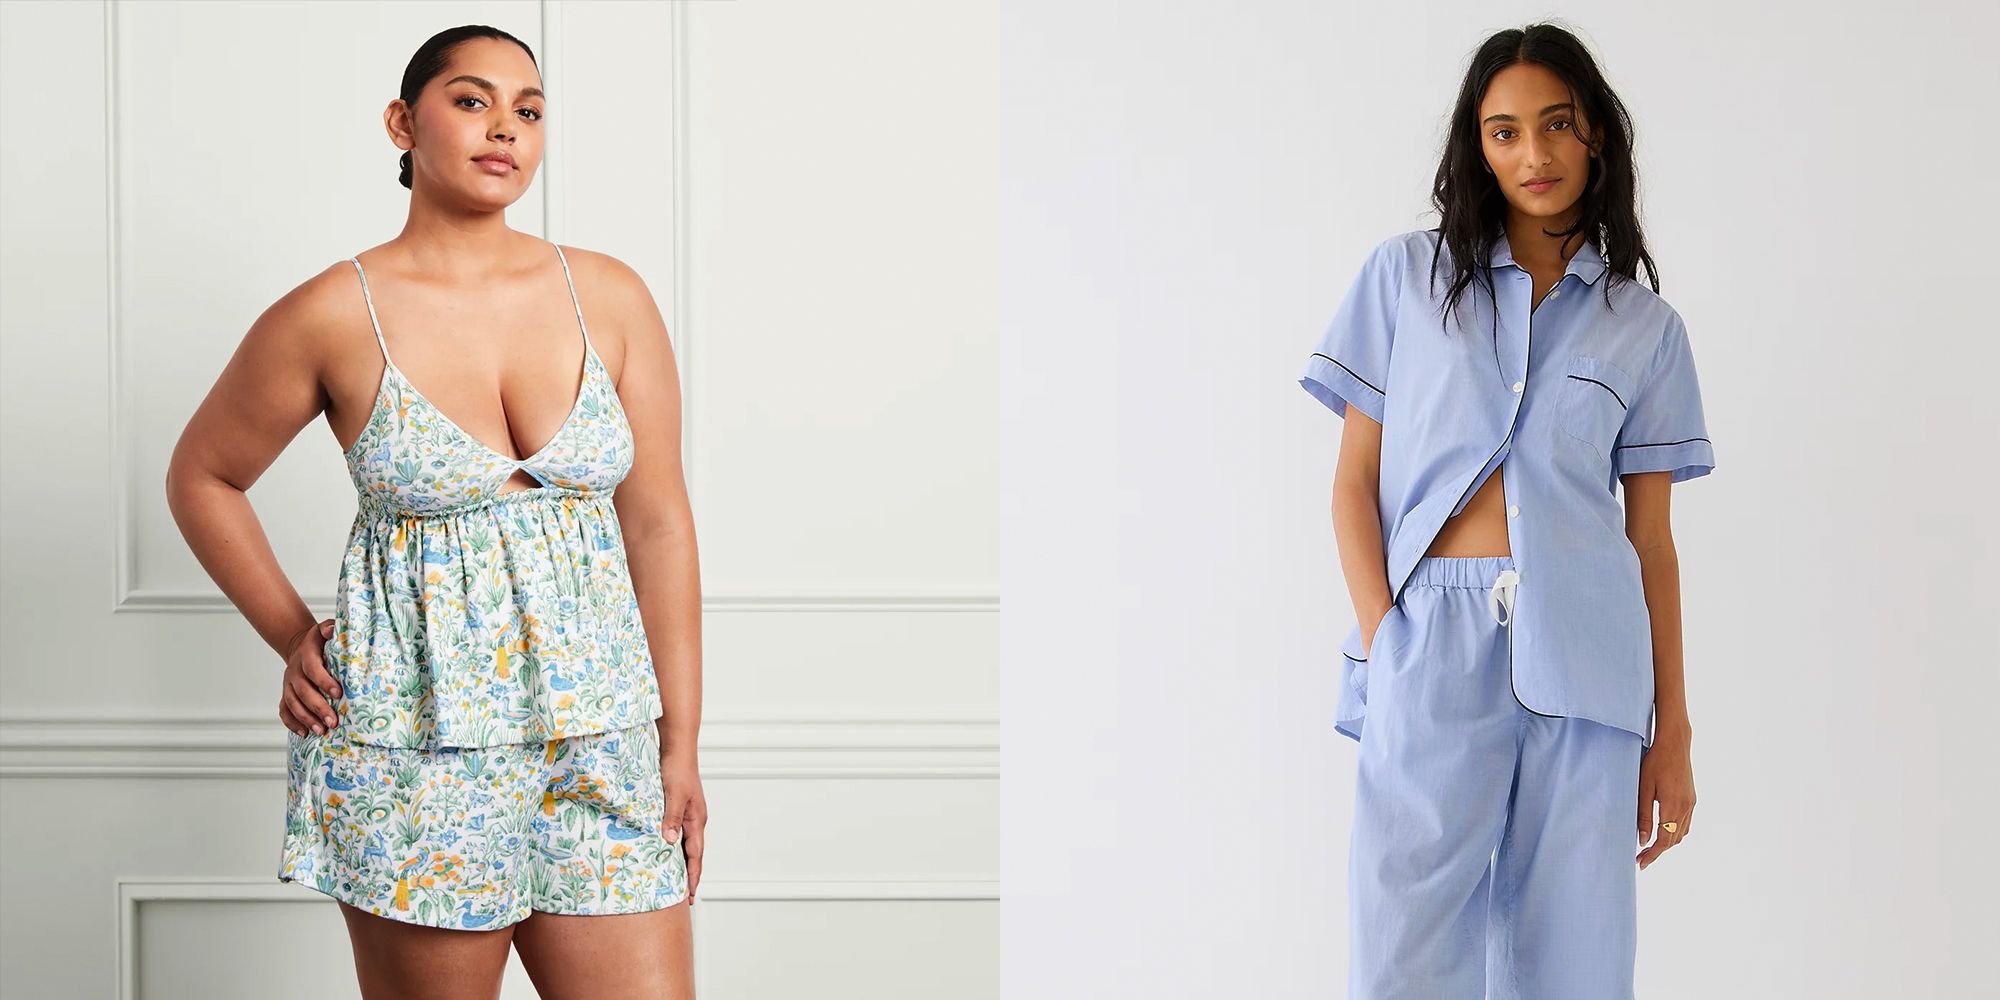 Don't Sweat It — These Breezy Summer PJs Are Just What You Need